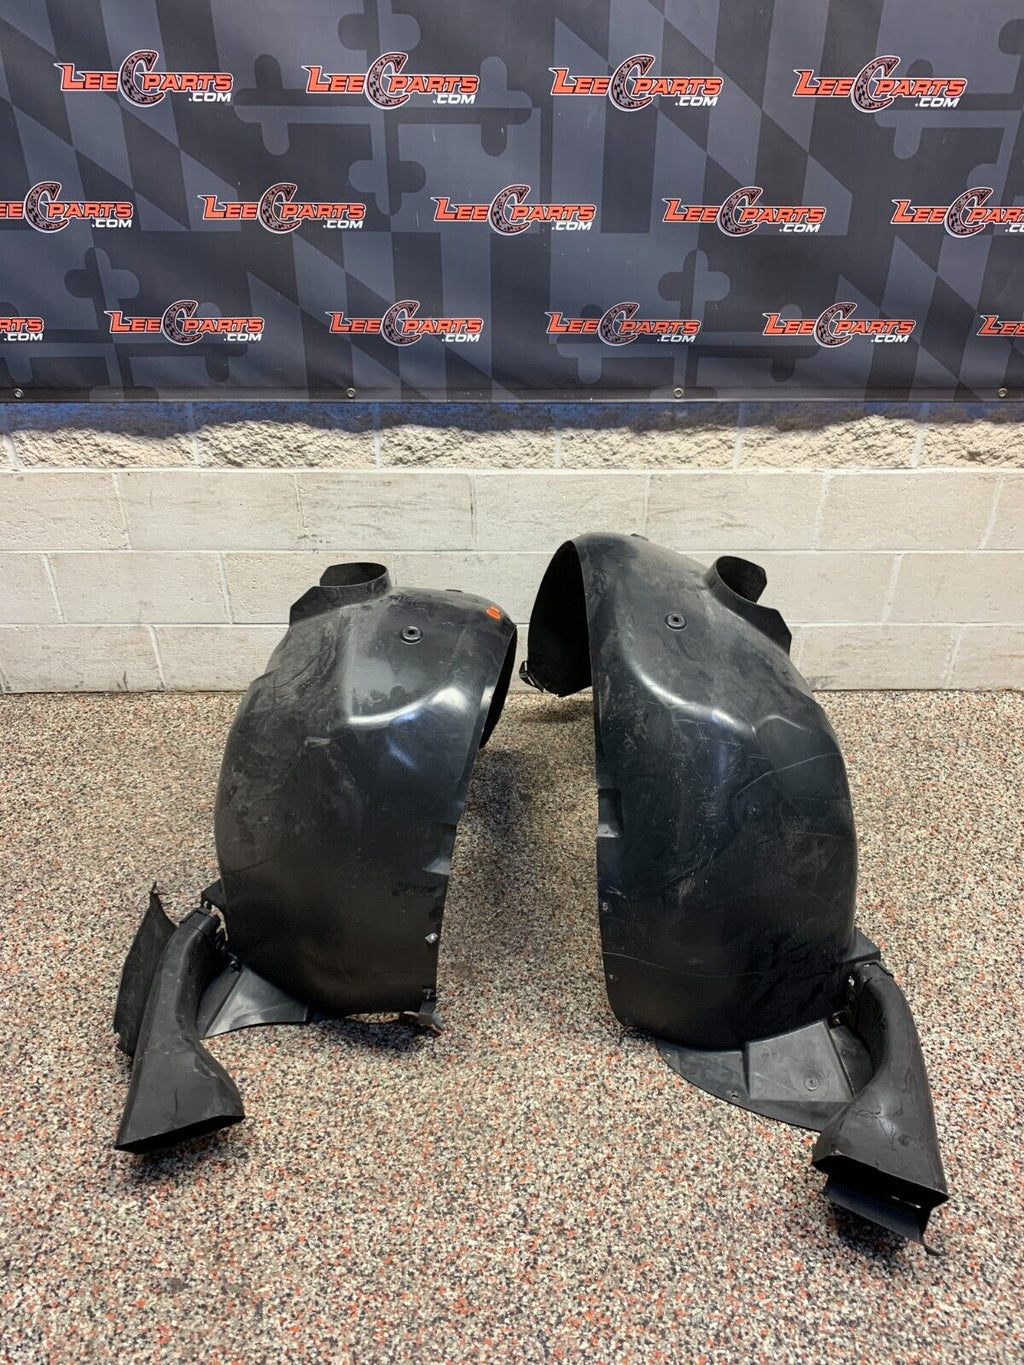 2015 CAMARO Z/28 OEM FRONT FENDER LINERS PAIR DRIVER PASSENGER DUCTS USED